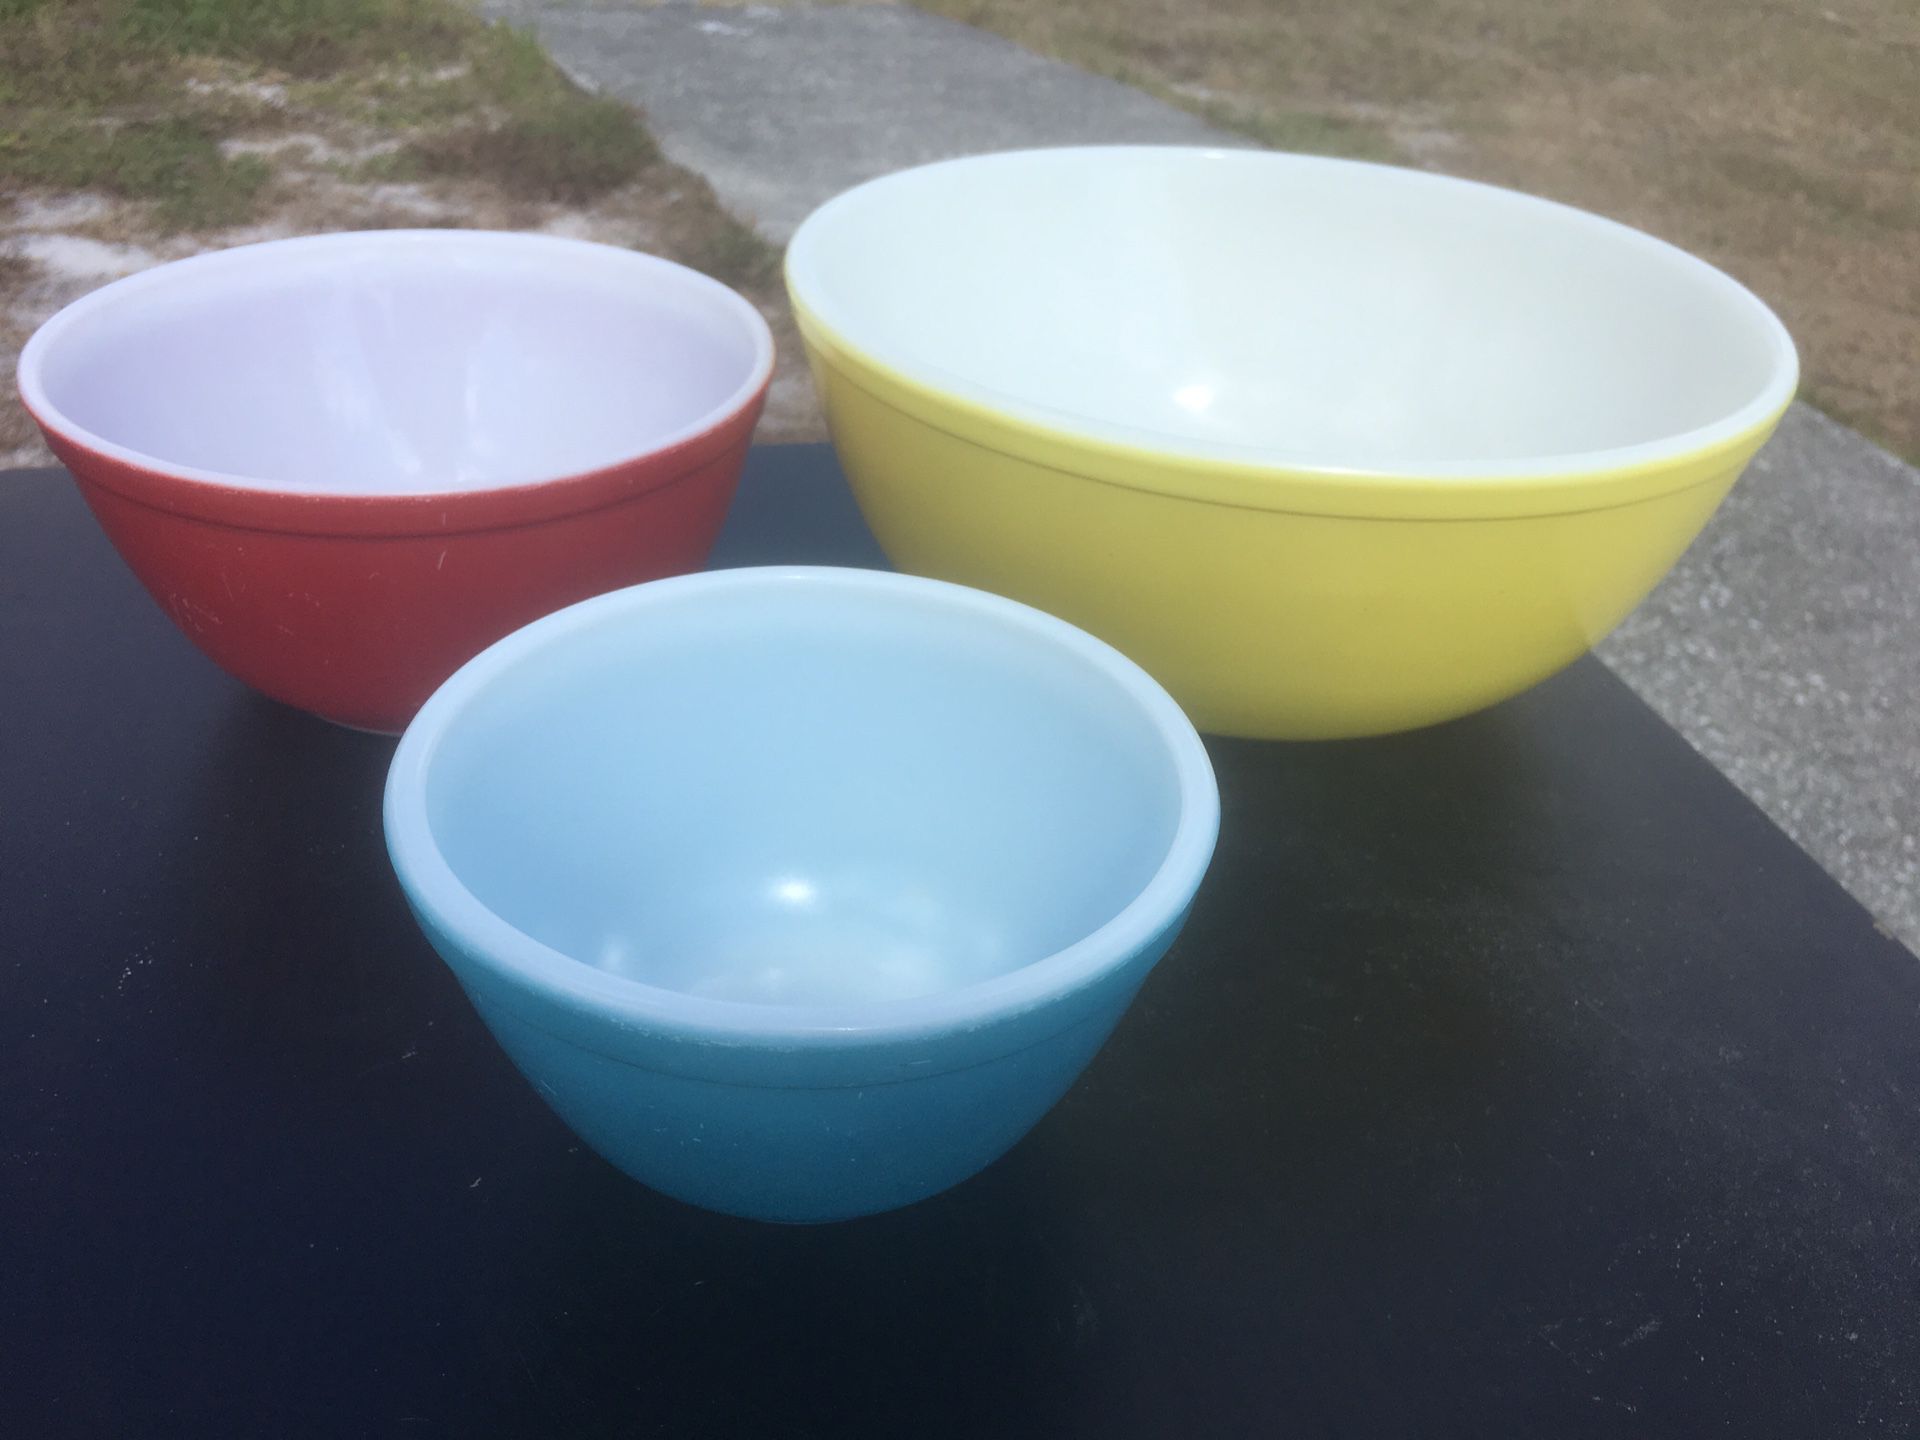 Vintage Pyrex Primary mixing bowls